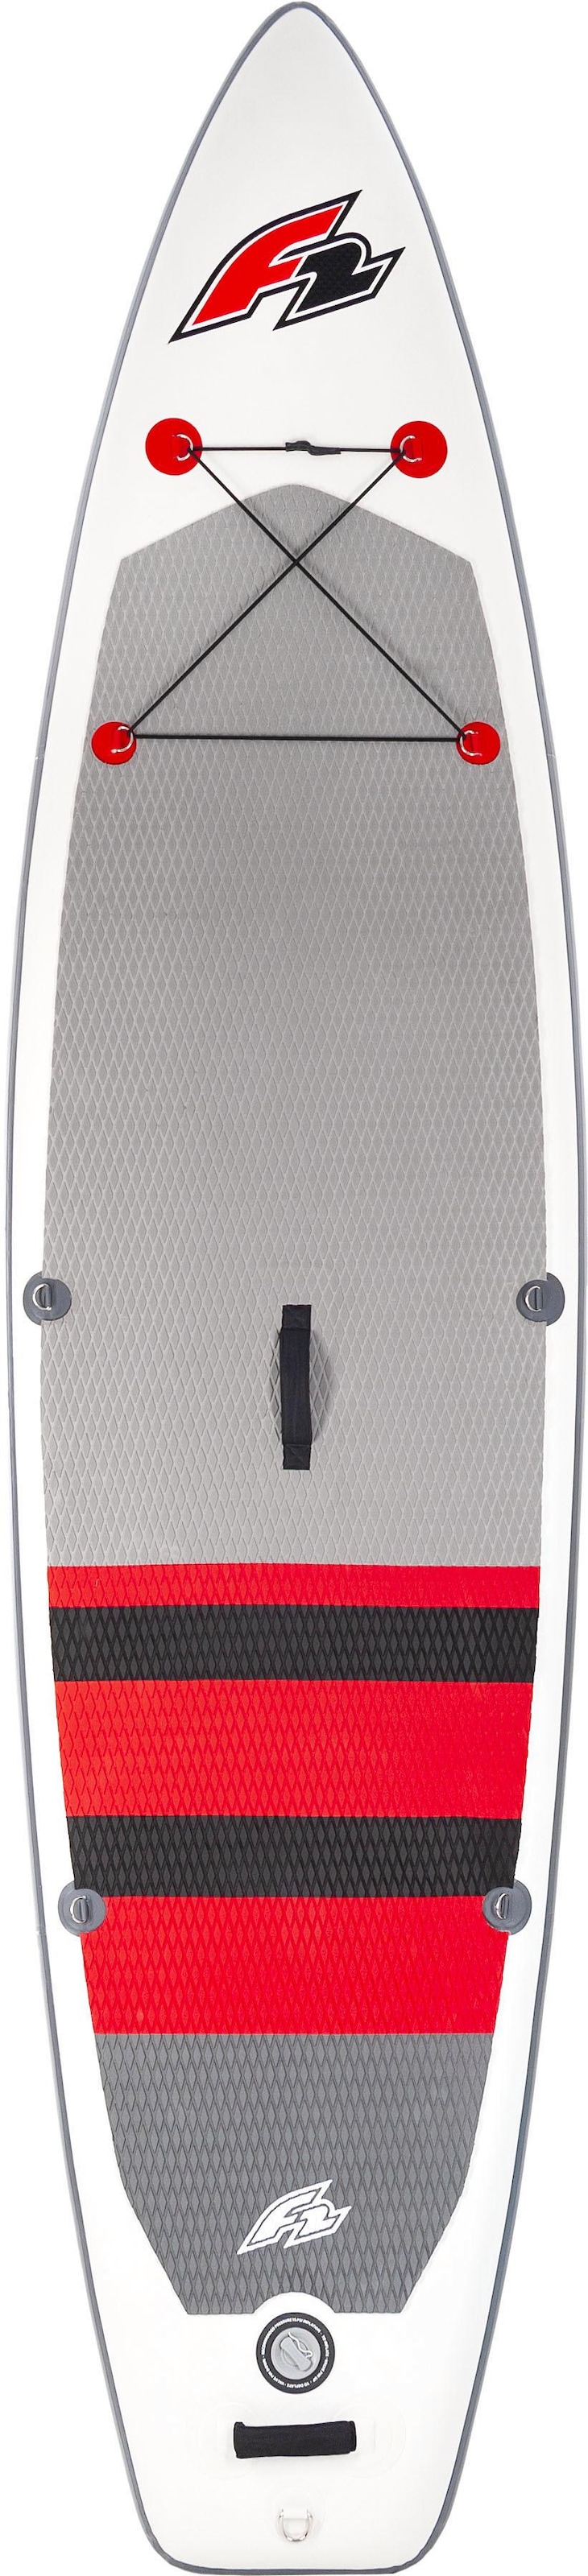 11,5«, F2 Stand Inflatable (Set, bei Up SUP-Board 5 Paddling »Union tlg.),